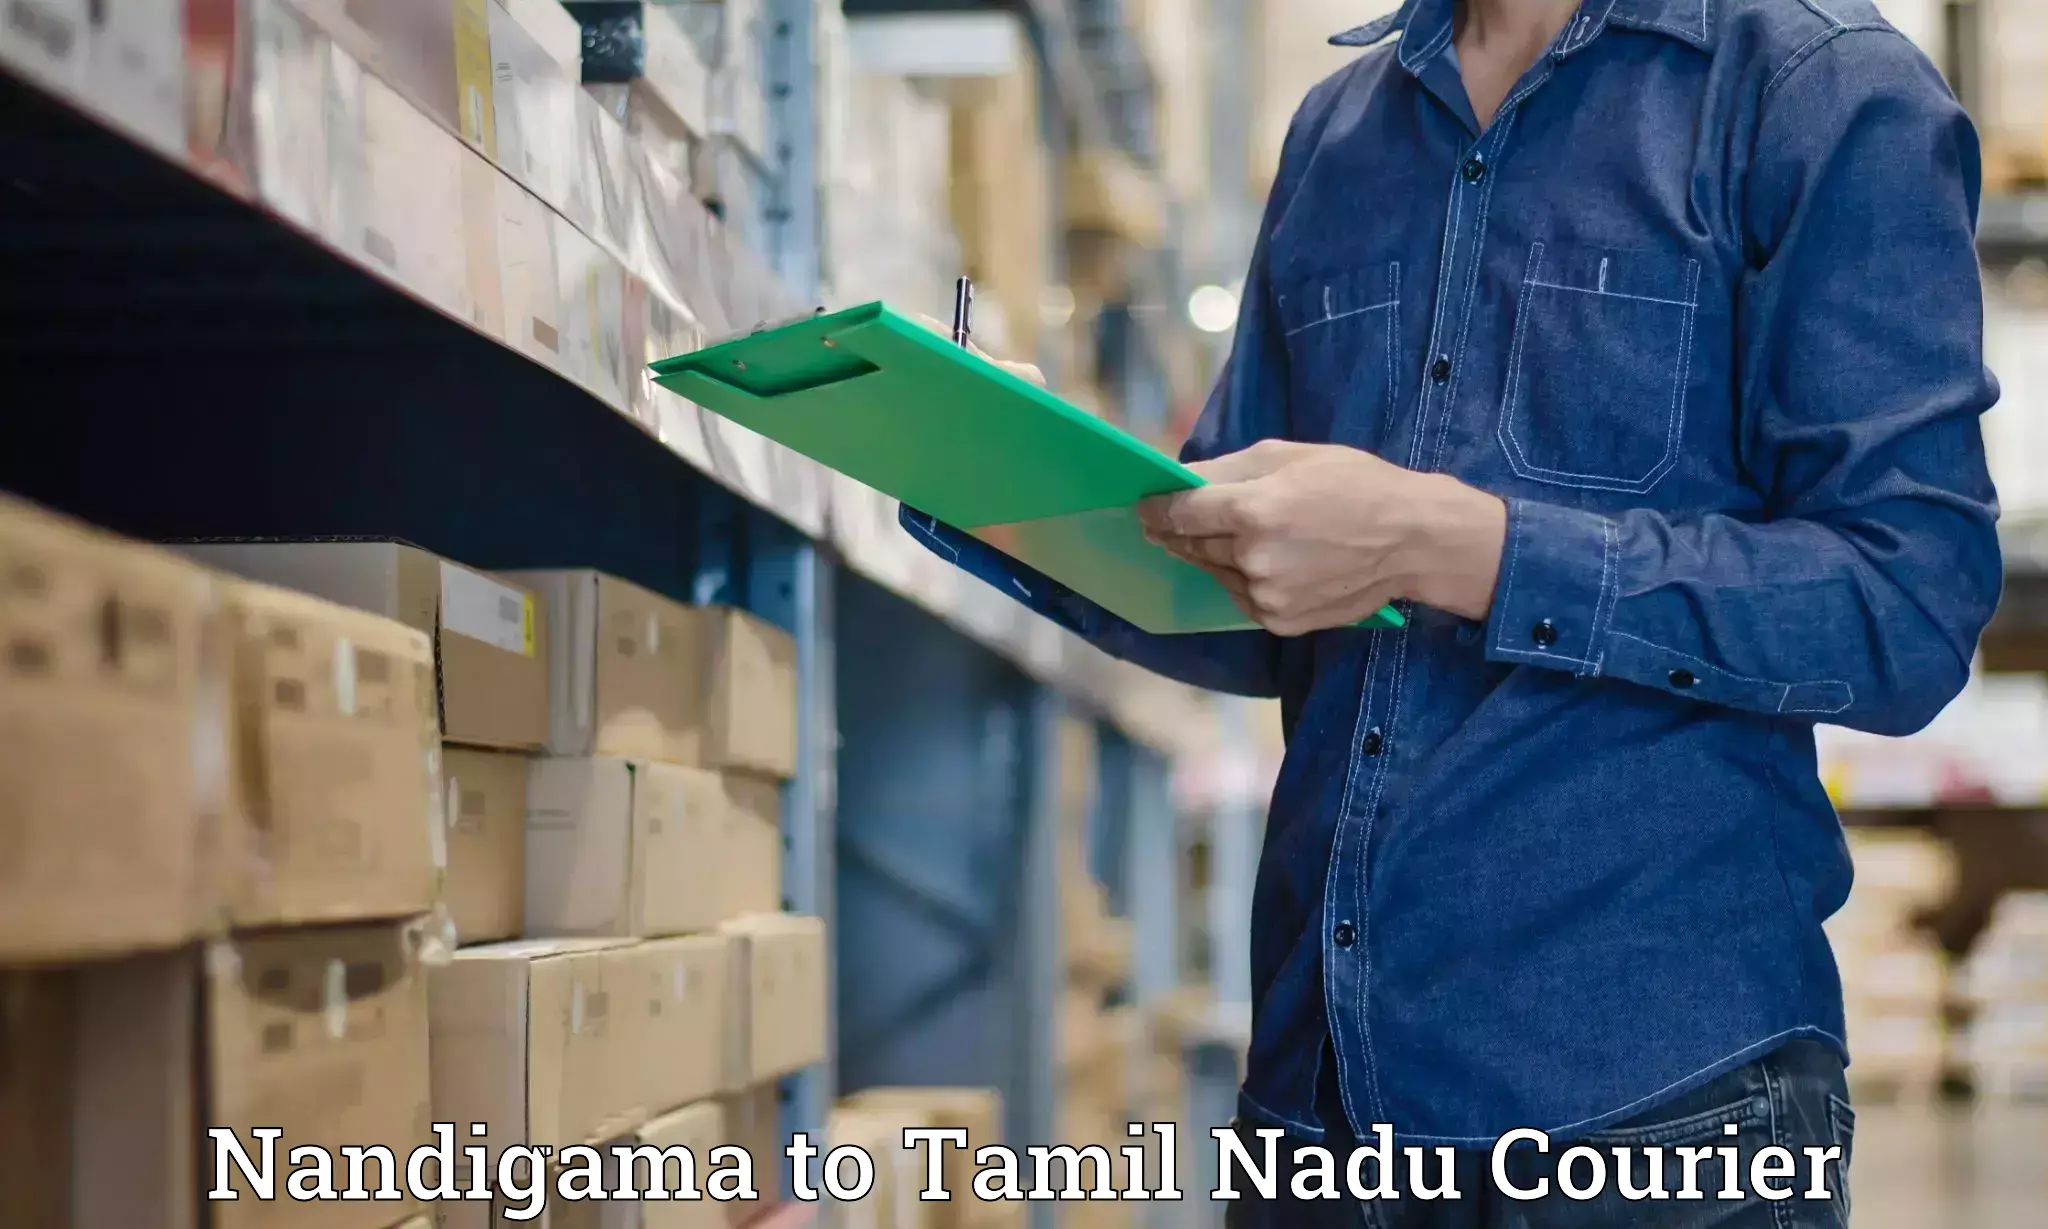 International courier networks Nandigama to Erode